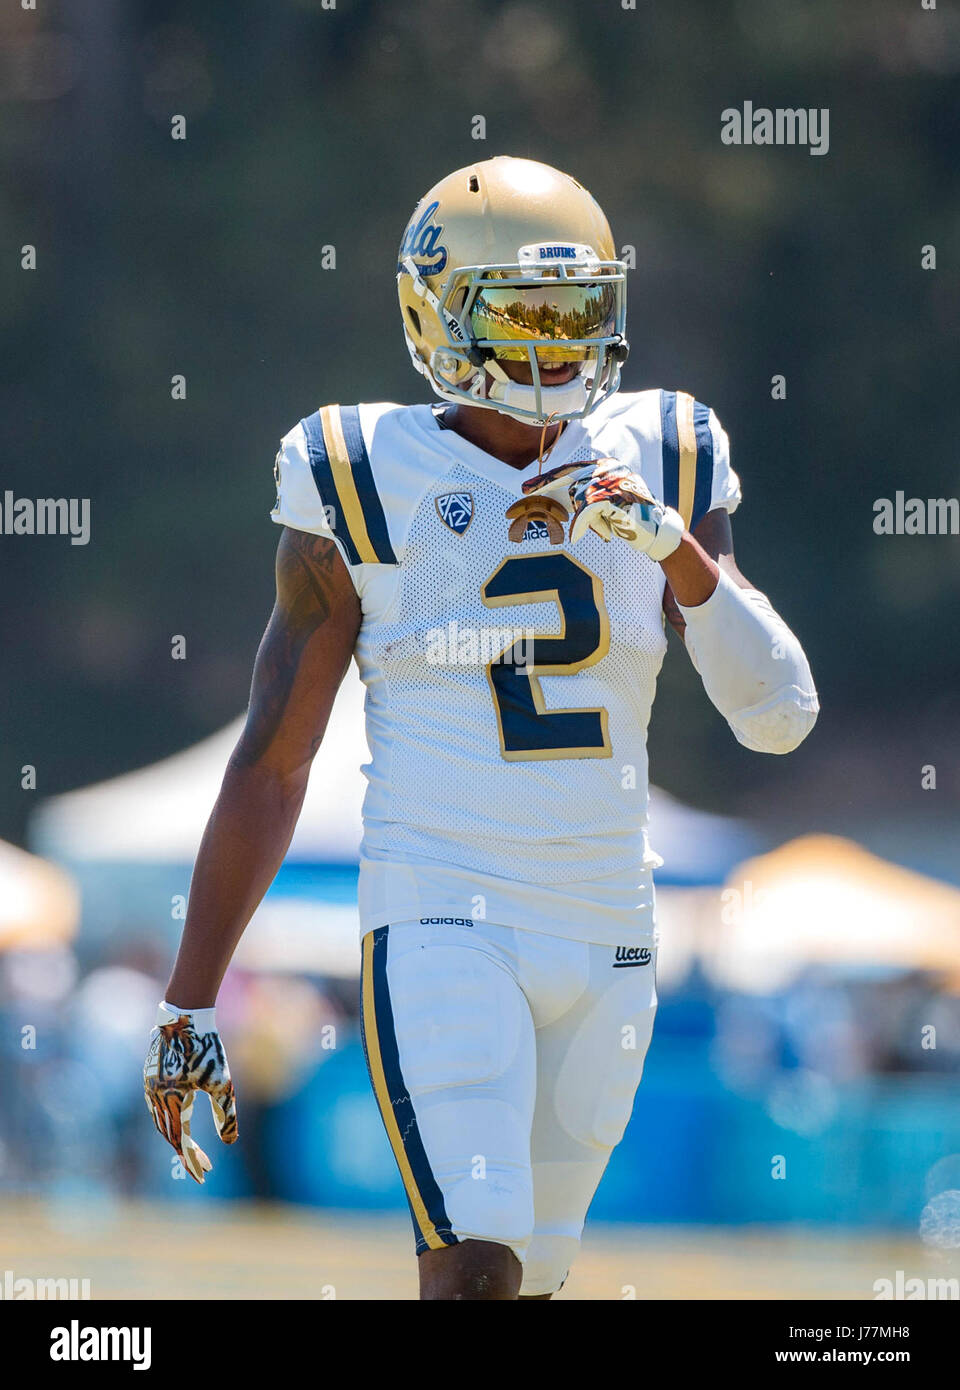 Los Angeles, CA, USA. 29th Apr, 2017. UCLA wide receiver (2) Jordan Lasley awaits the play during the UCLA white vs blue Spring Showcase on Saturday, April 29, 2017 at Drake